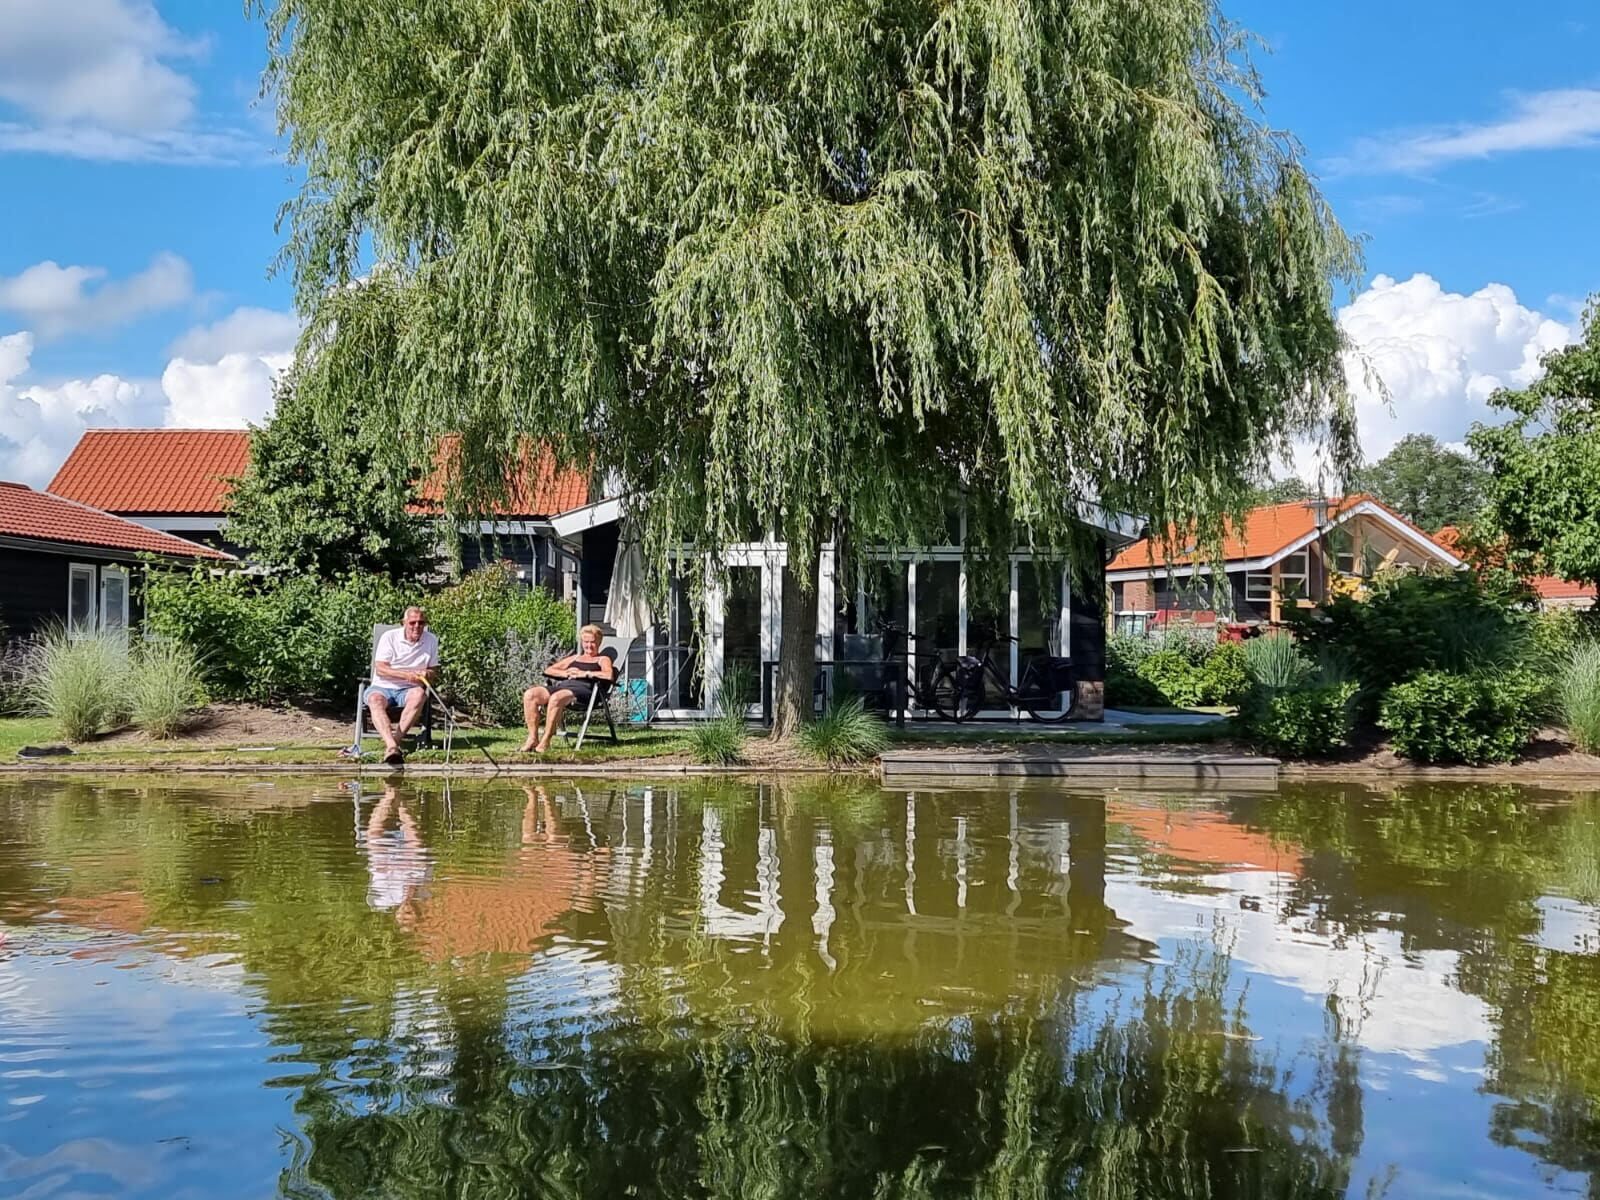 Buying a holiday home in the Netherlands